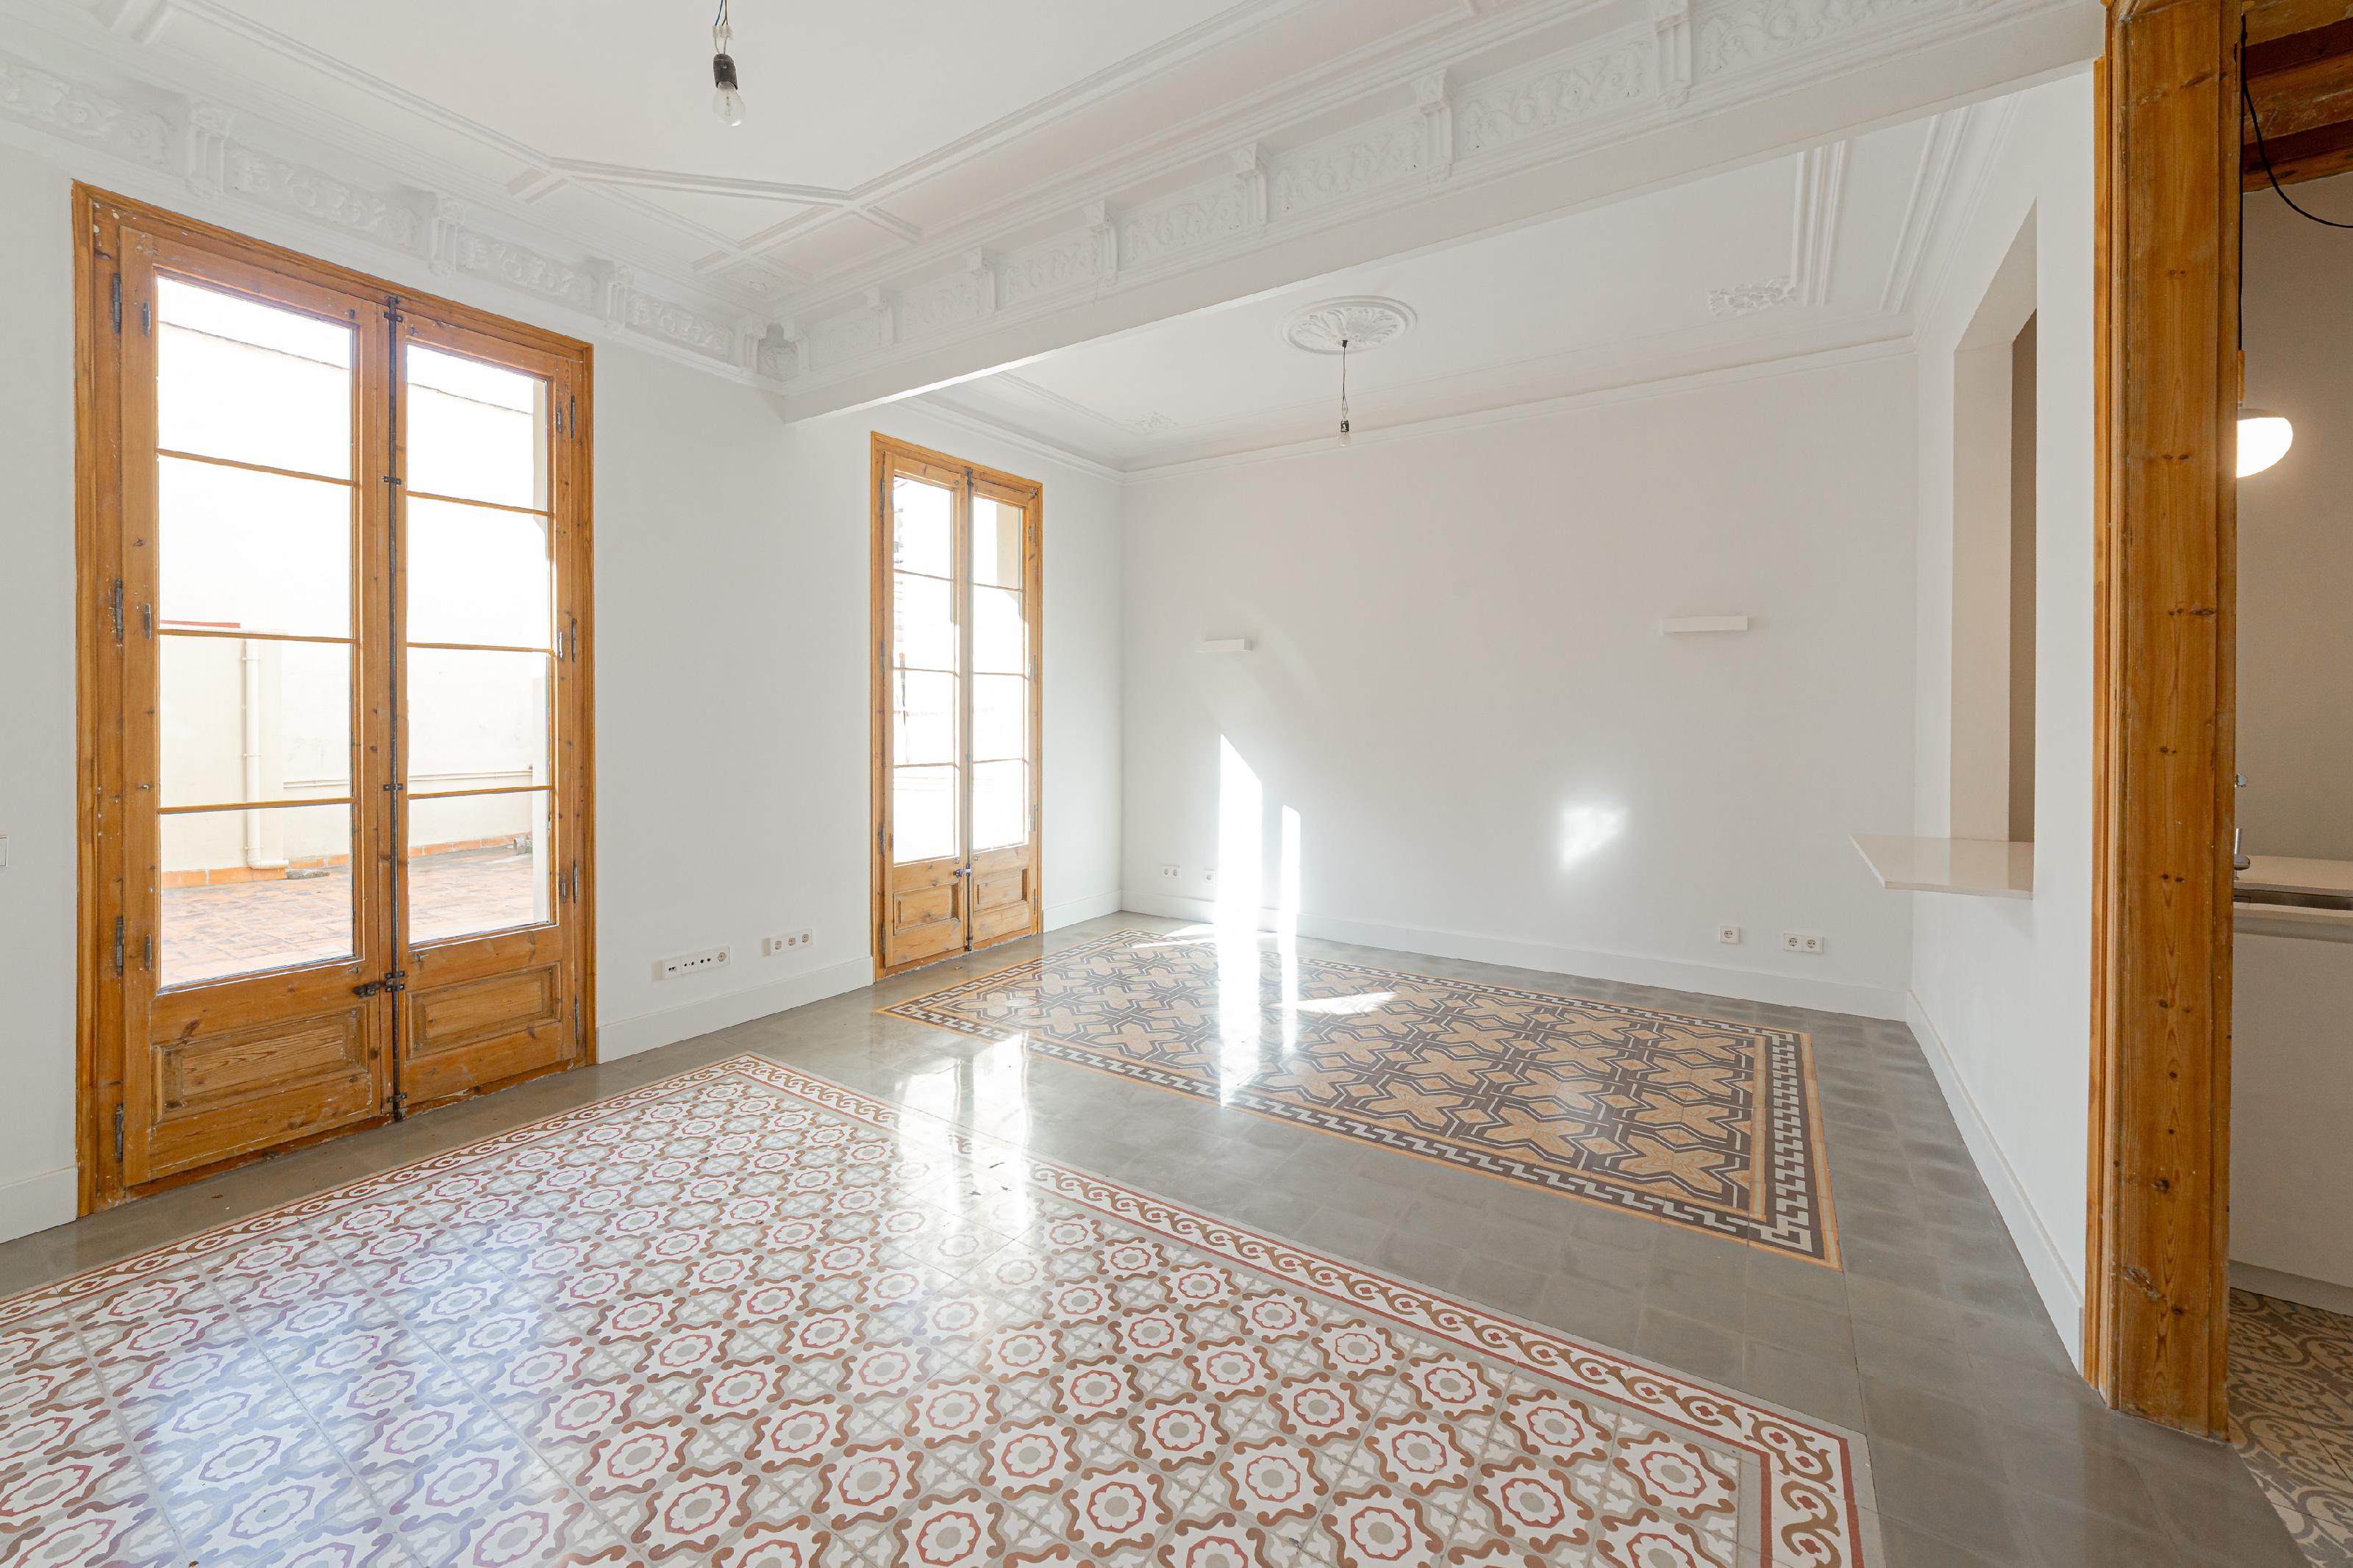 275557 Flat for sale in Eixample, Old Esquerre Eixample 18